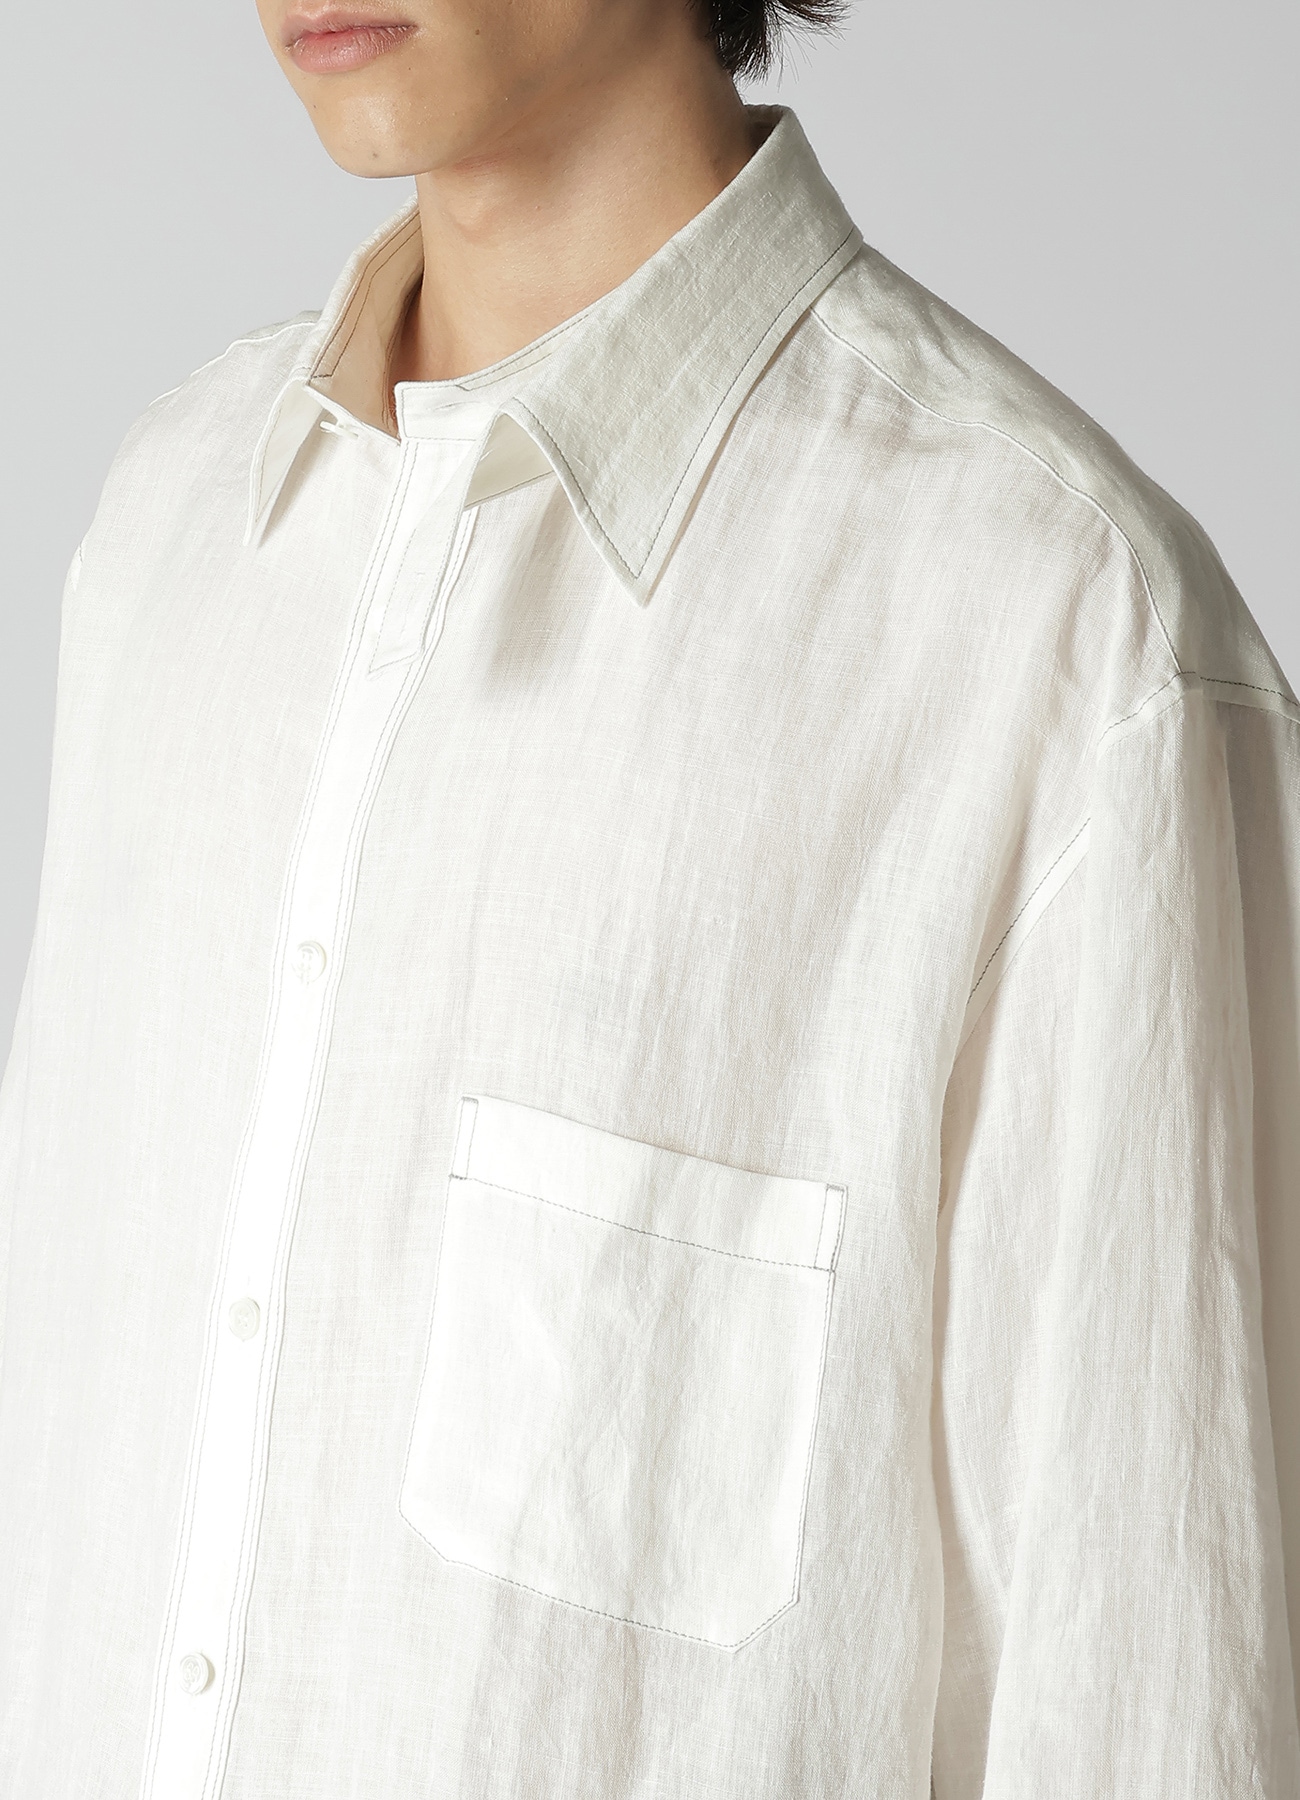 WHITE 60 LINEN LAWN SHIRT WITH ASYMMETRY COLLAR AND COLLOR COMBI DOUBLE STITCH